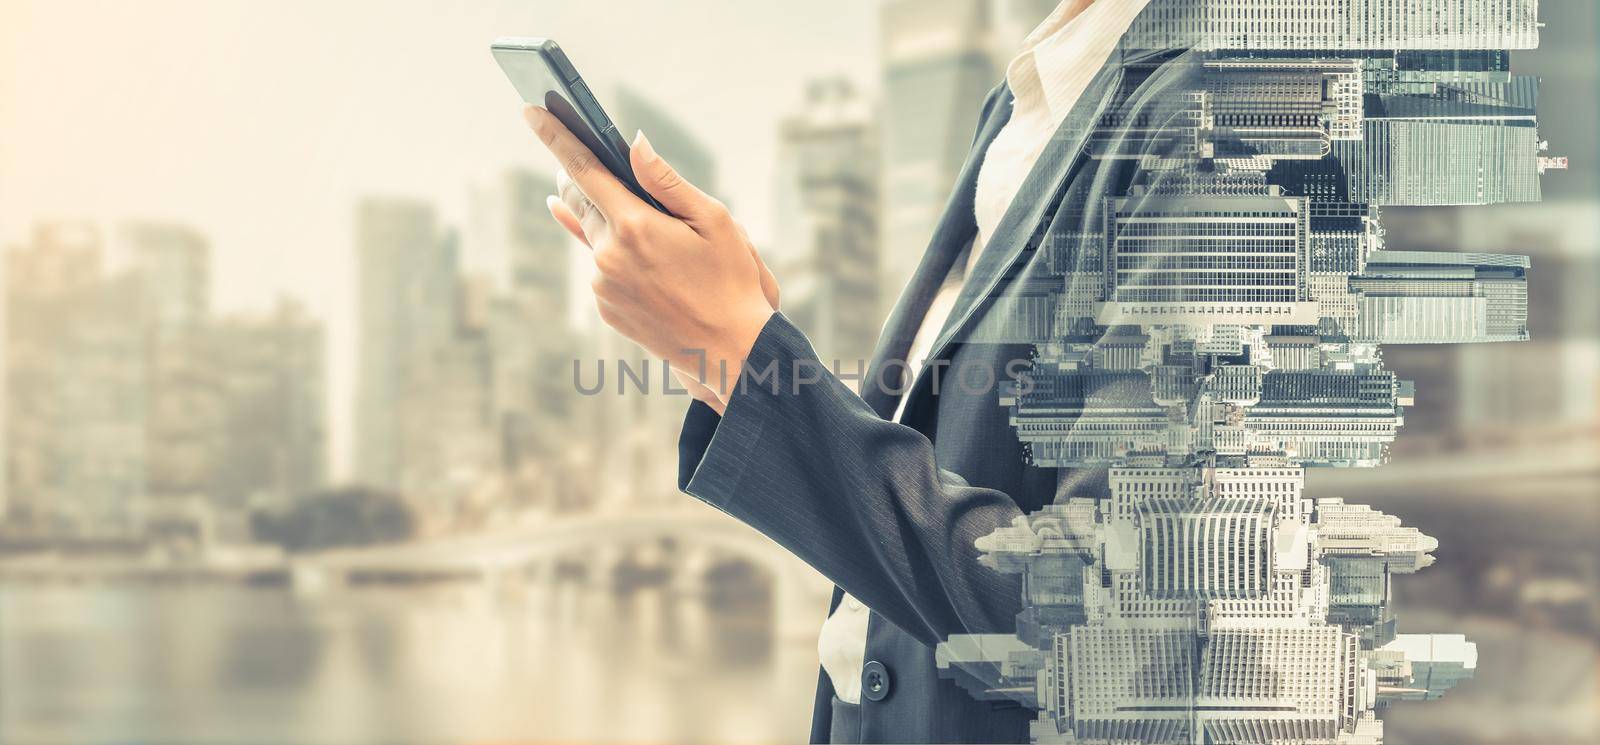 Young businesswoman using mobile phone with modern city buildings background. Future telecommunication technology and internet of things ( IOT ) concept.